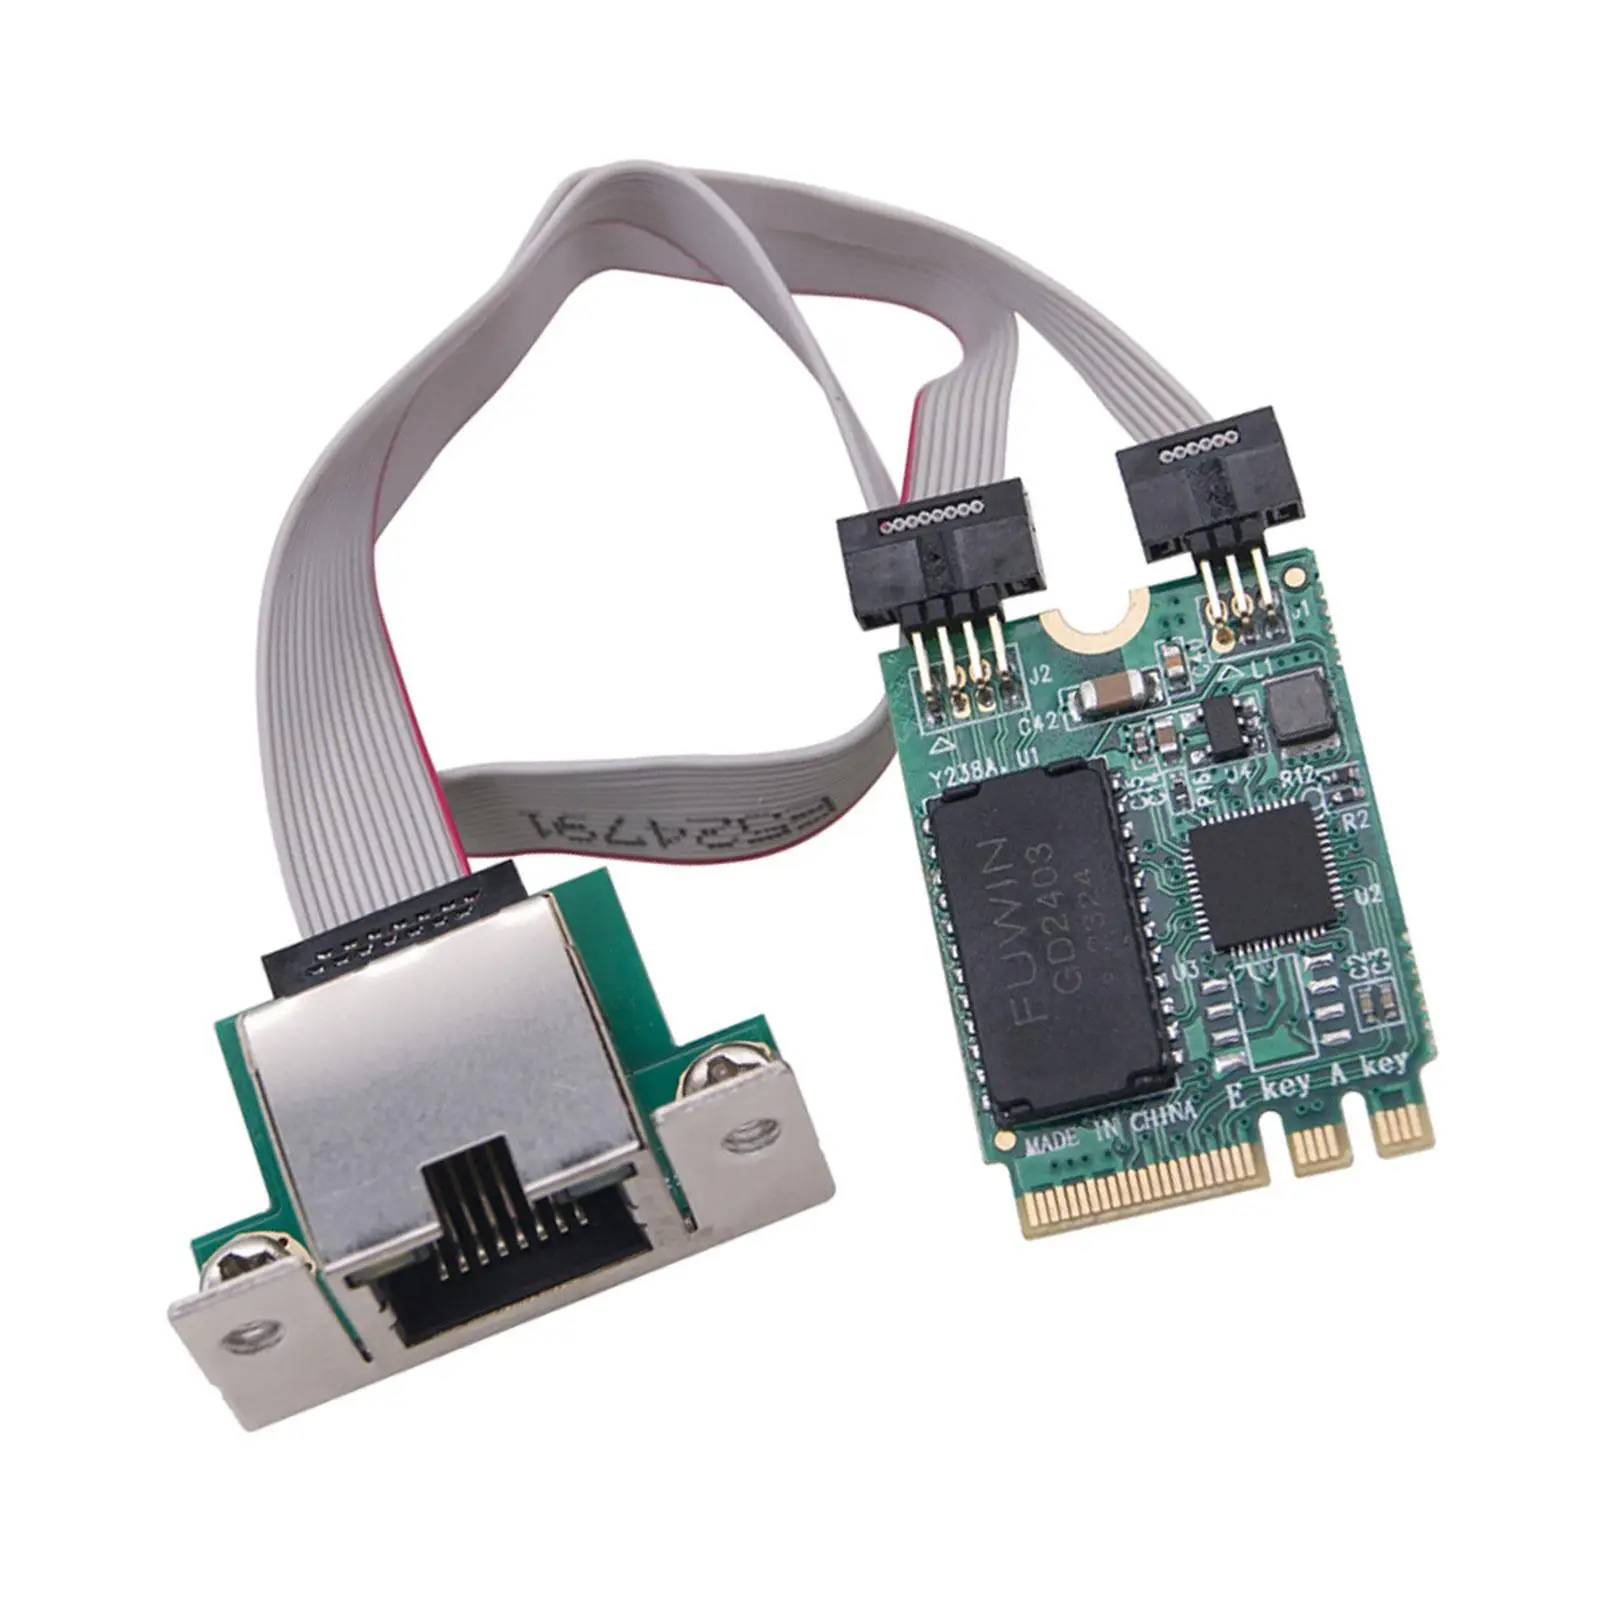 Network Card 10/100/1000/2500Mbps with 1 Port LAN Controller Card Easily Installation Server Ethernet Card